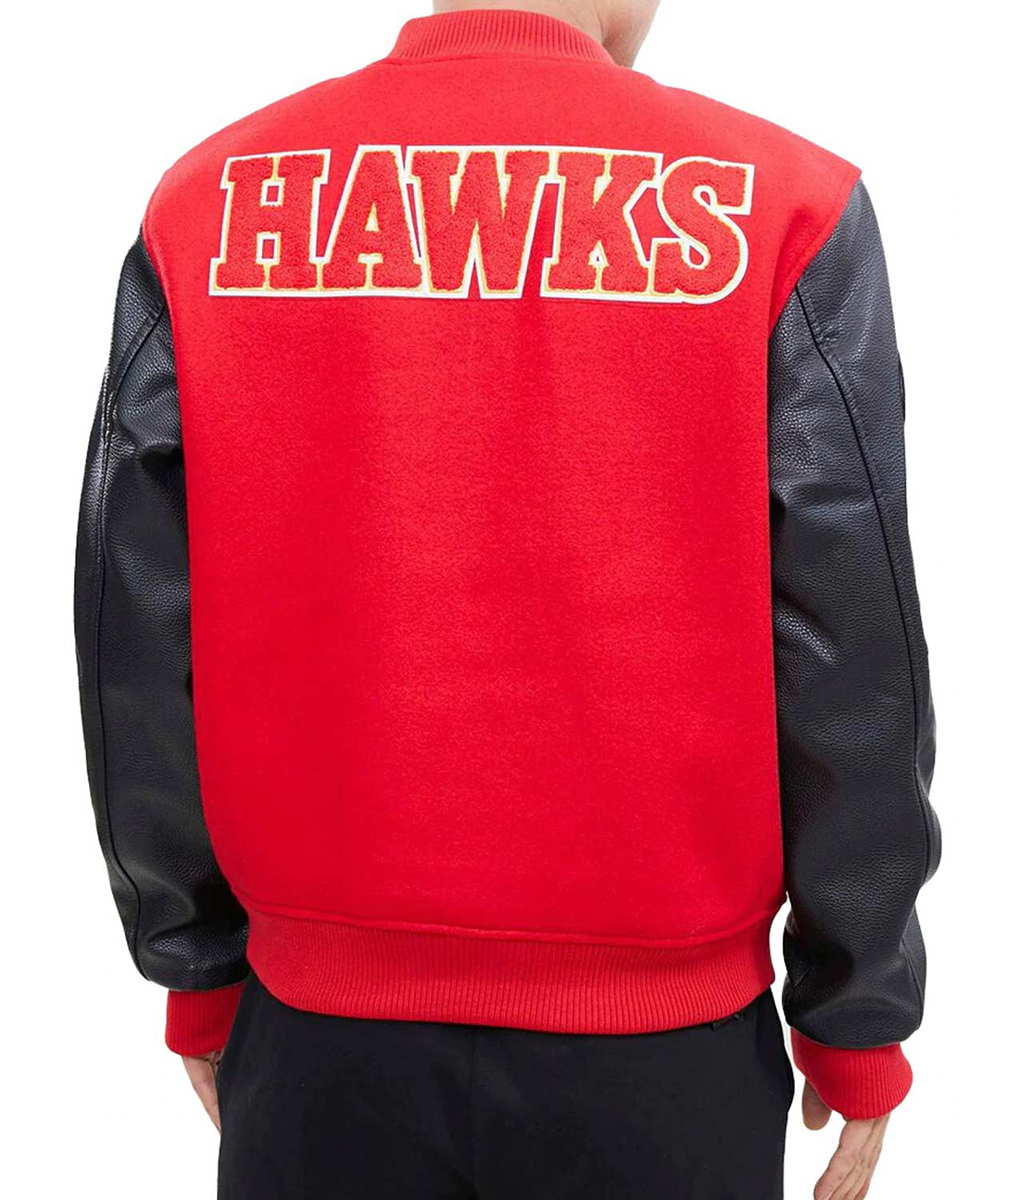 ATL Hawks Red and Black Jacket (3)